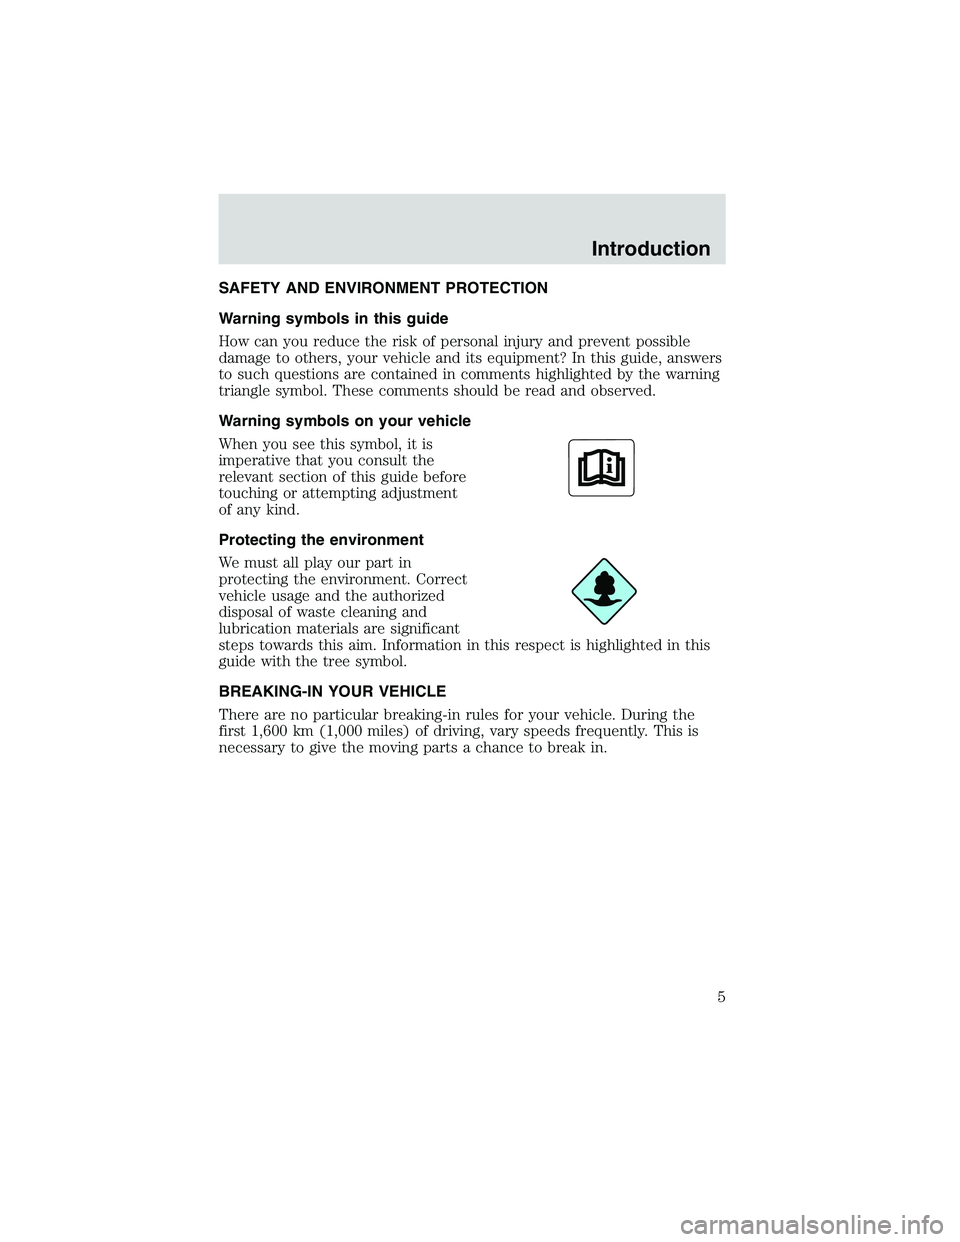 MAZDA MODEL B4000 4WD 2002  Owners Manual SAFETY AND ENVIRONMENT PROTECTION
Warning symbols in this guide
How can you reduce the risk of personal injury and prevent possible
damage to others, your vehicle and its equipment? In this guide, ans